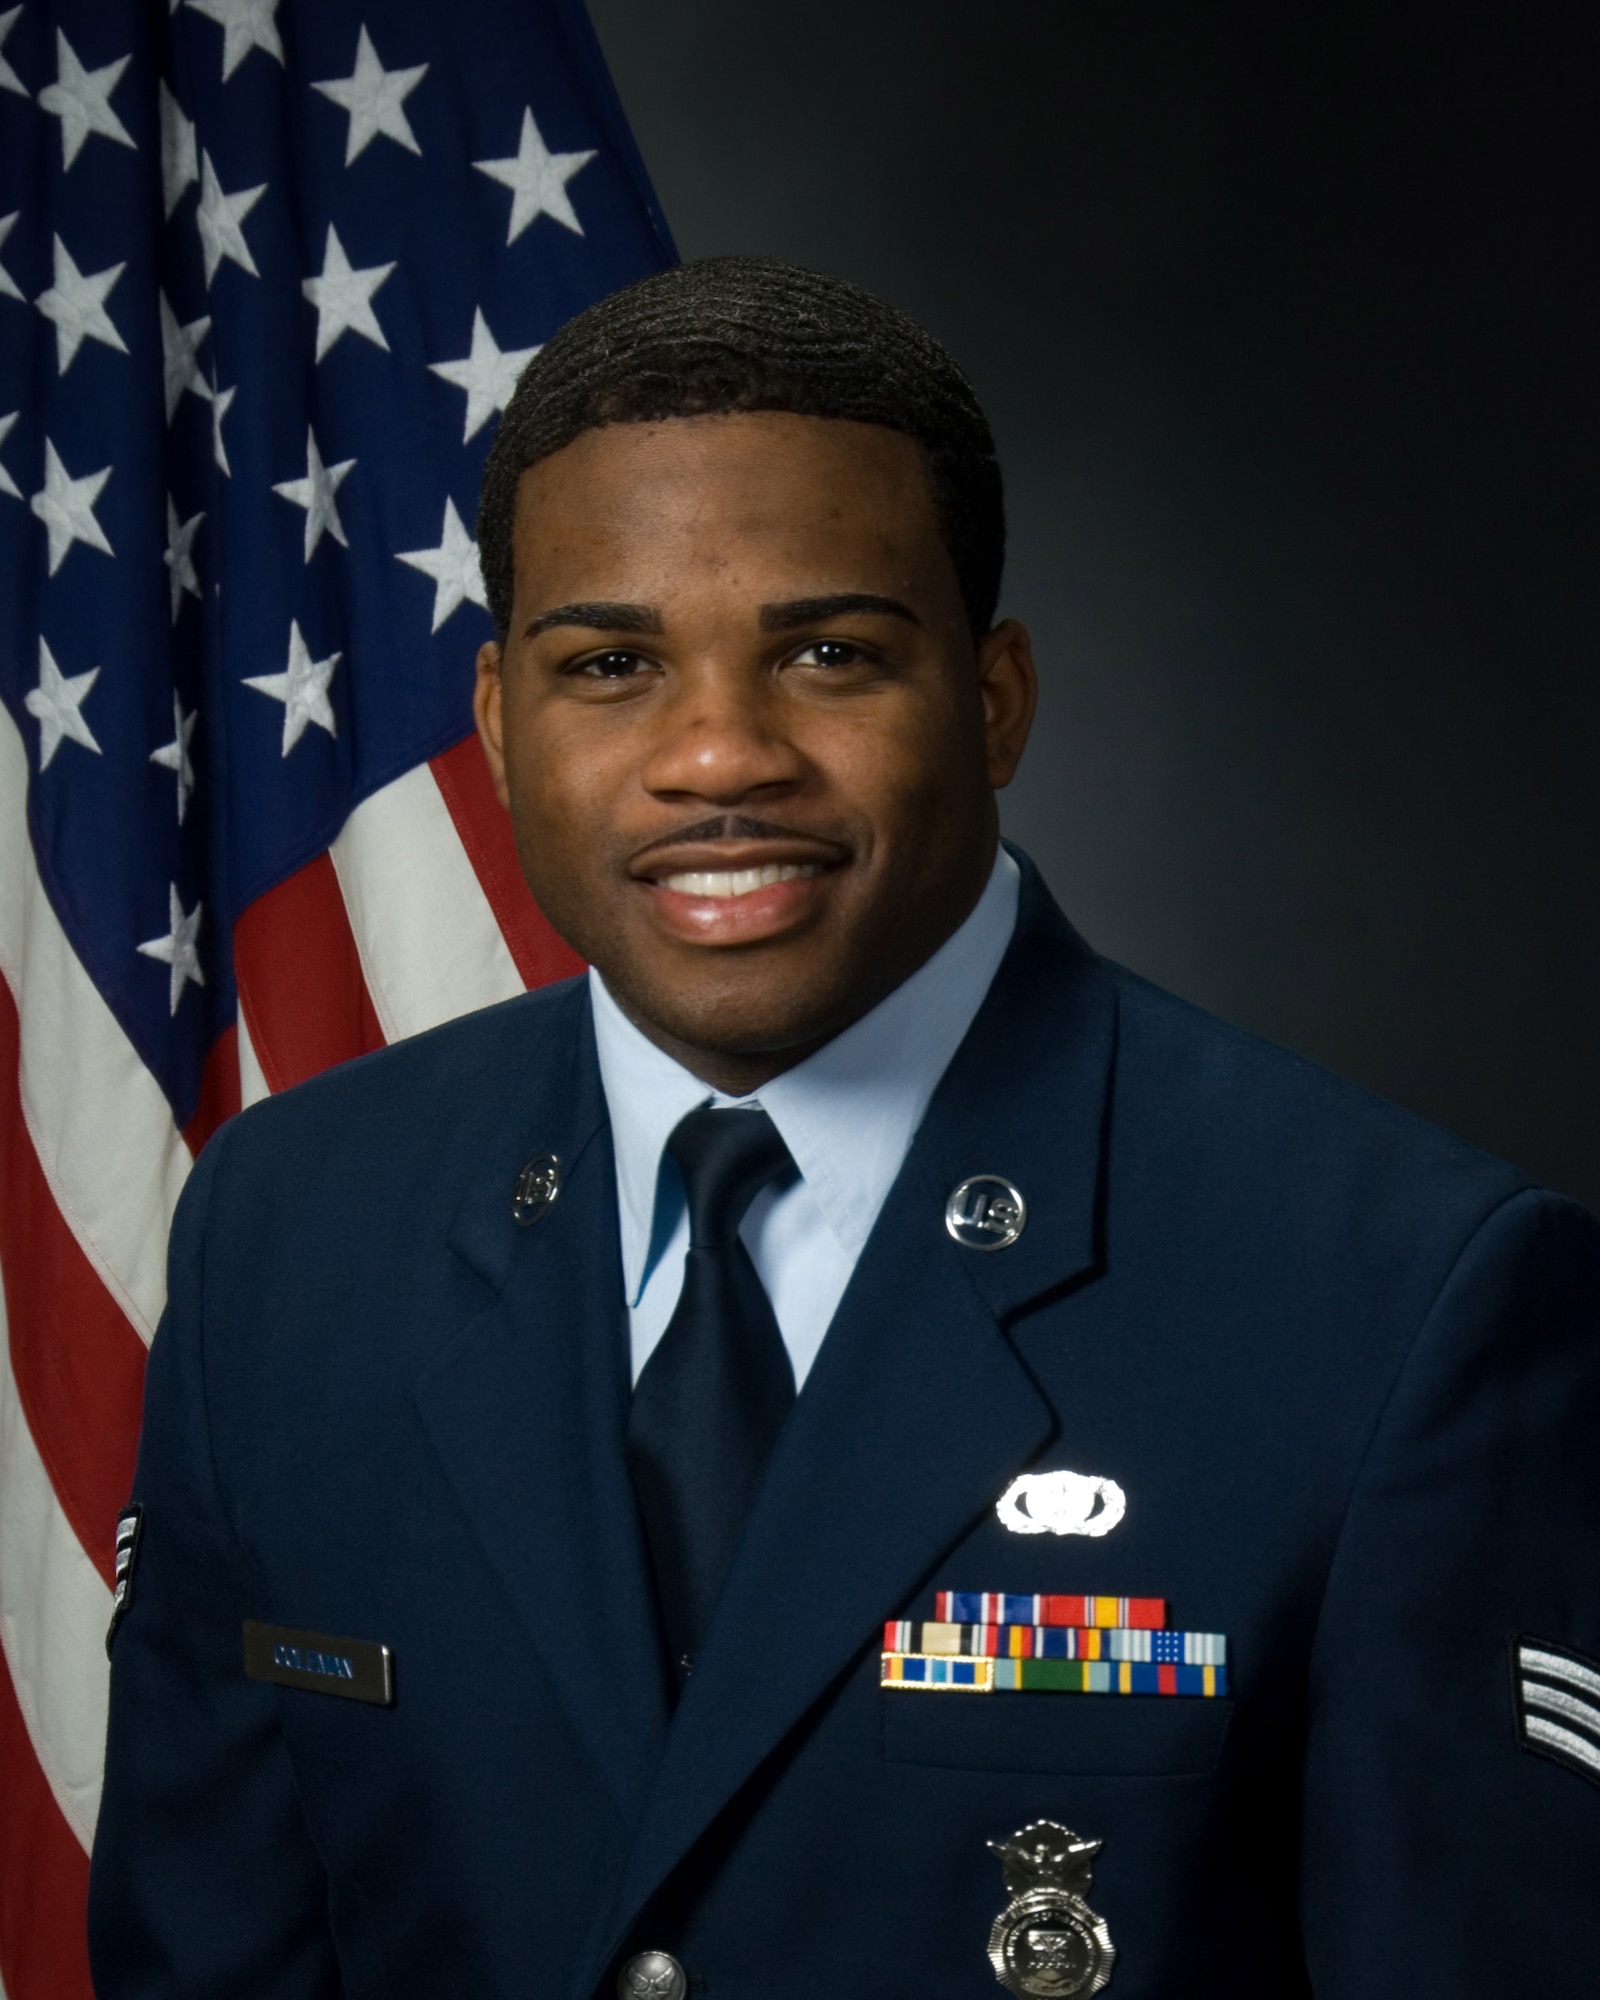 Senior Airman Brian K. Coleman, 42nd Air Base Wing, is the Air University Airman of the Year for 2008. (Air Force photo)